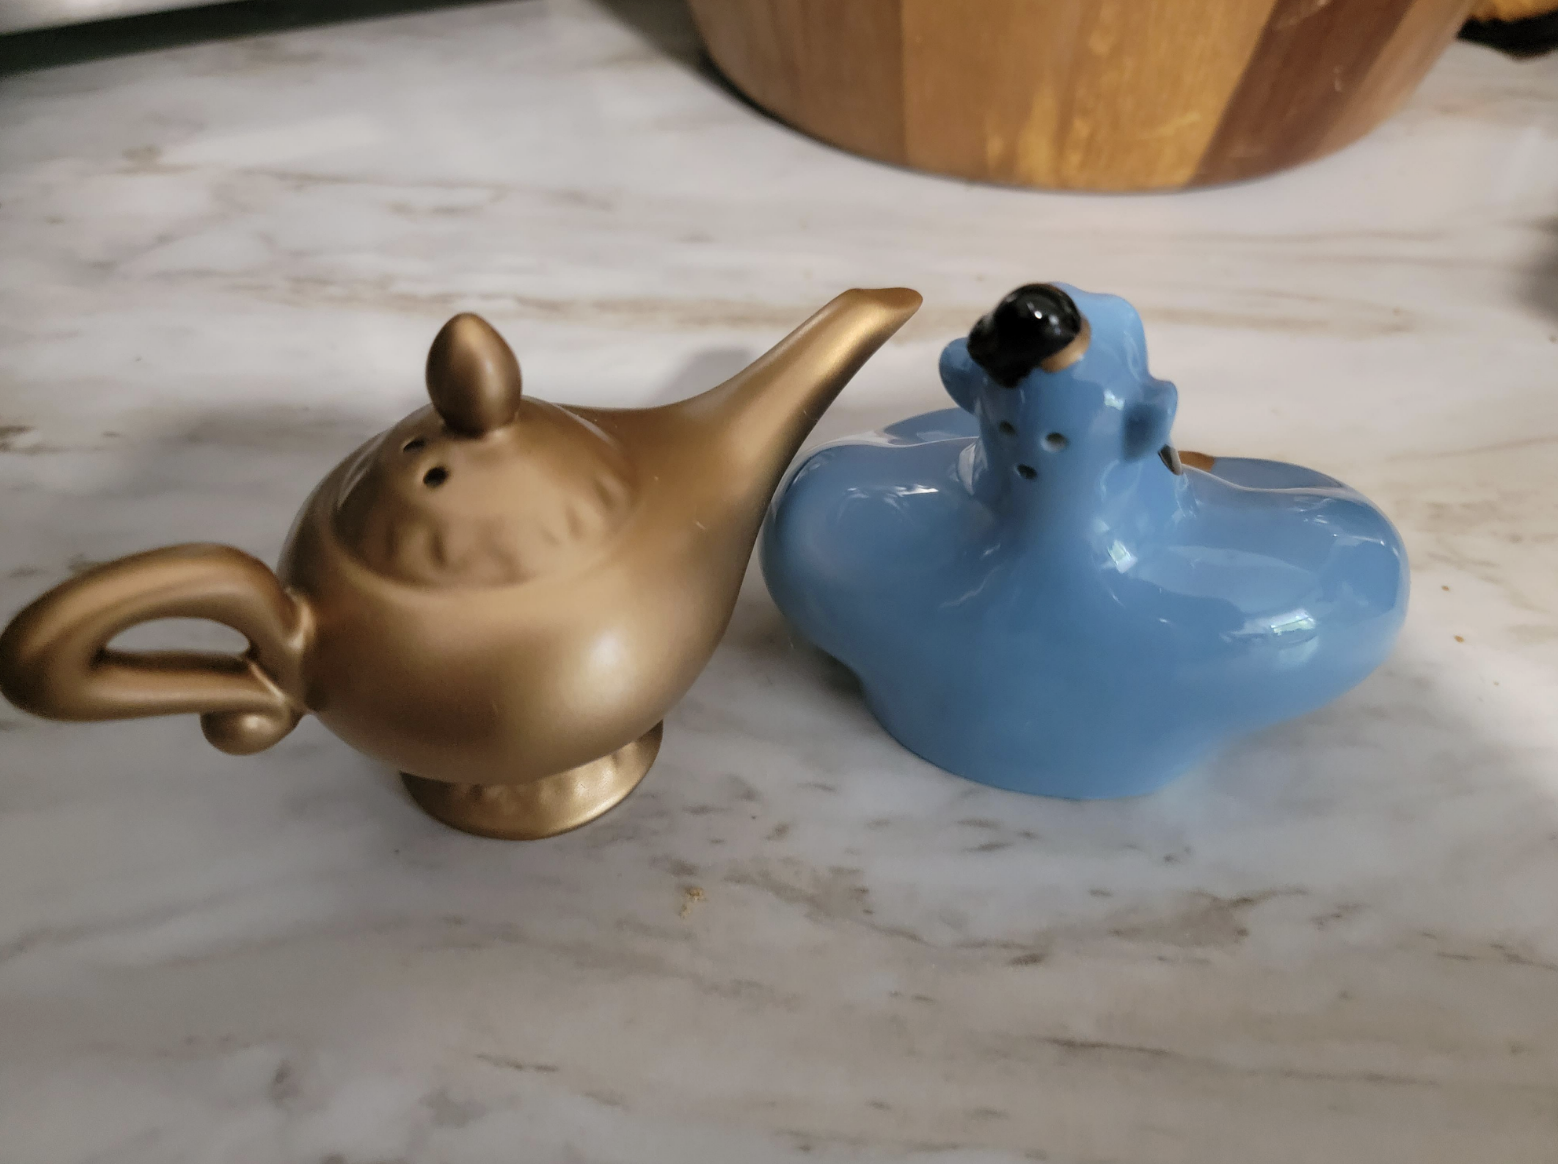 The salt shaker is shaped like the magic lamp from Aladdin, but the salt comes out two holes drilled in the top of the lamp, meaning you have to fully turn it upside down